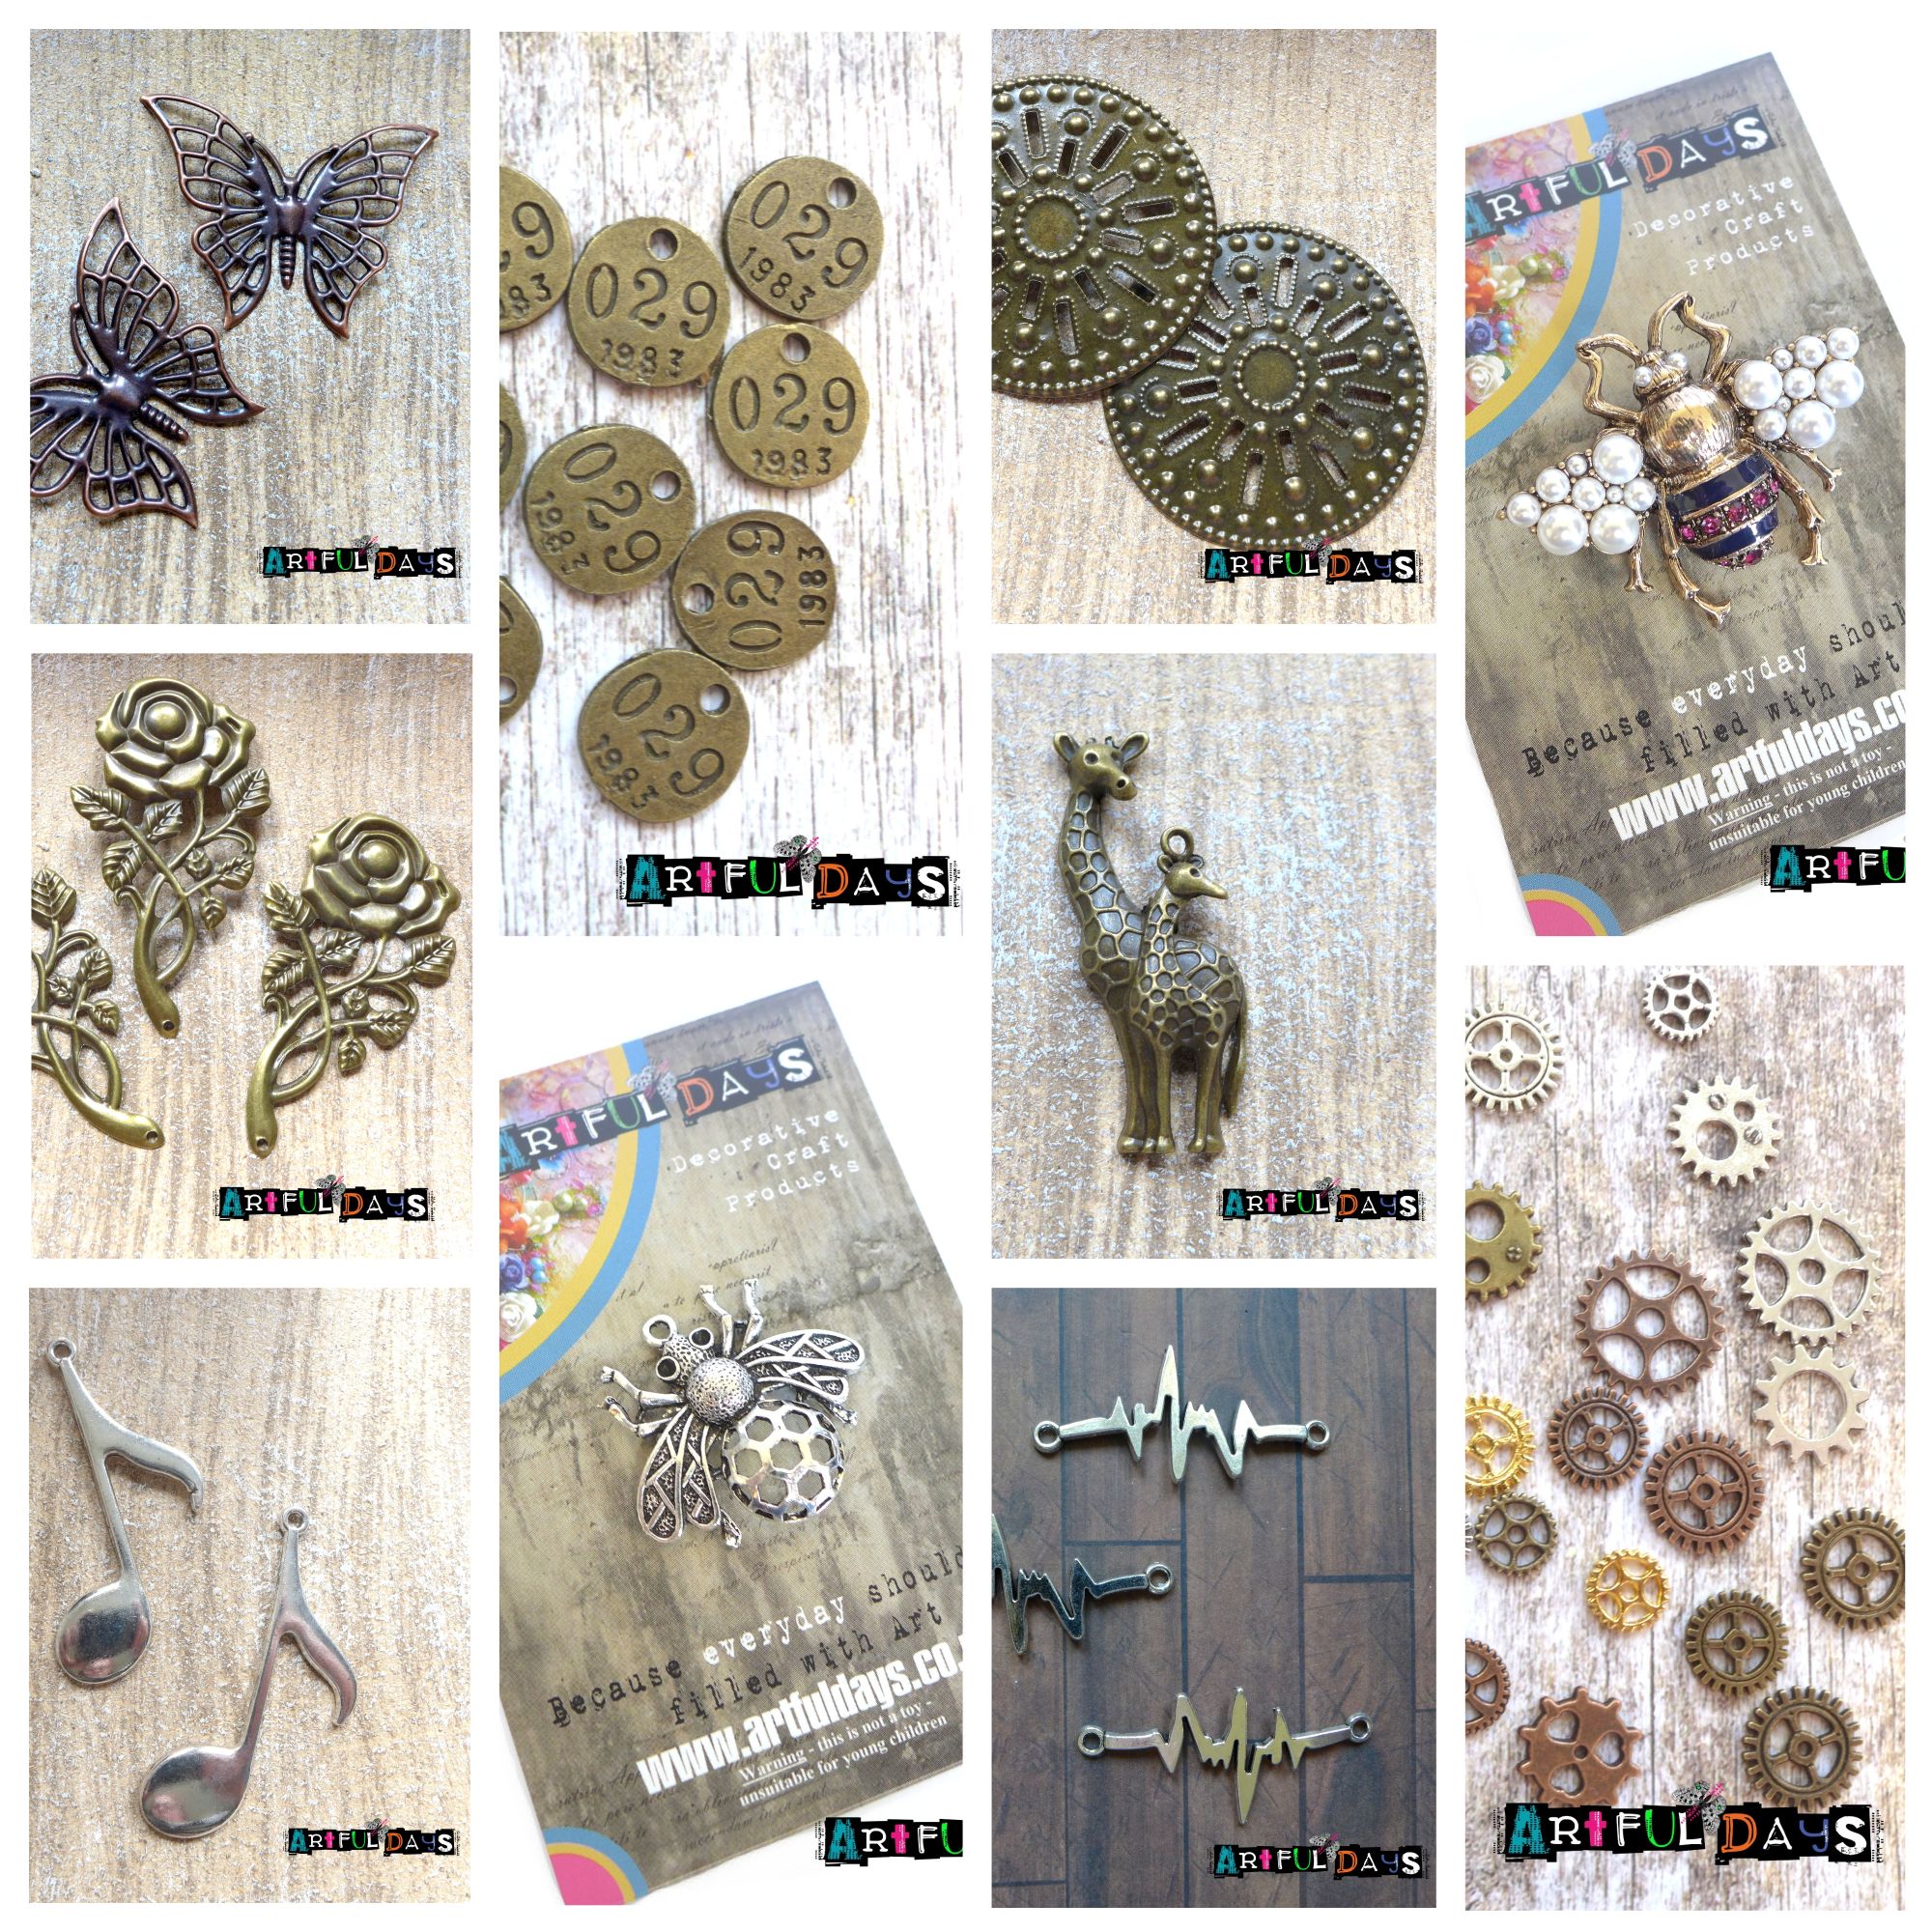 All our Artful Days procured products in one convenent place. We have Flowers, Charms, Canvas & Craft Surfaces, Cabochons, Stamens, Natural elements such as moss, Stickers & Epherma, Hardware, Glass Vials, Our Tresured Artifact and lots of other embelishments. We regularly add new things, so keep checking back :)